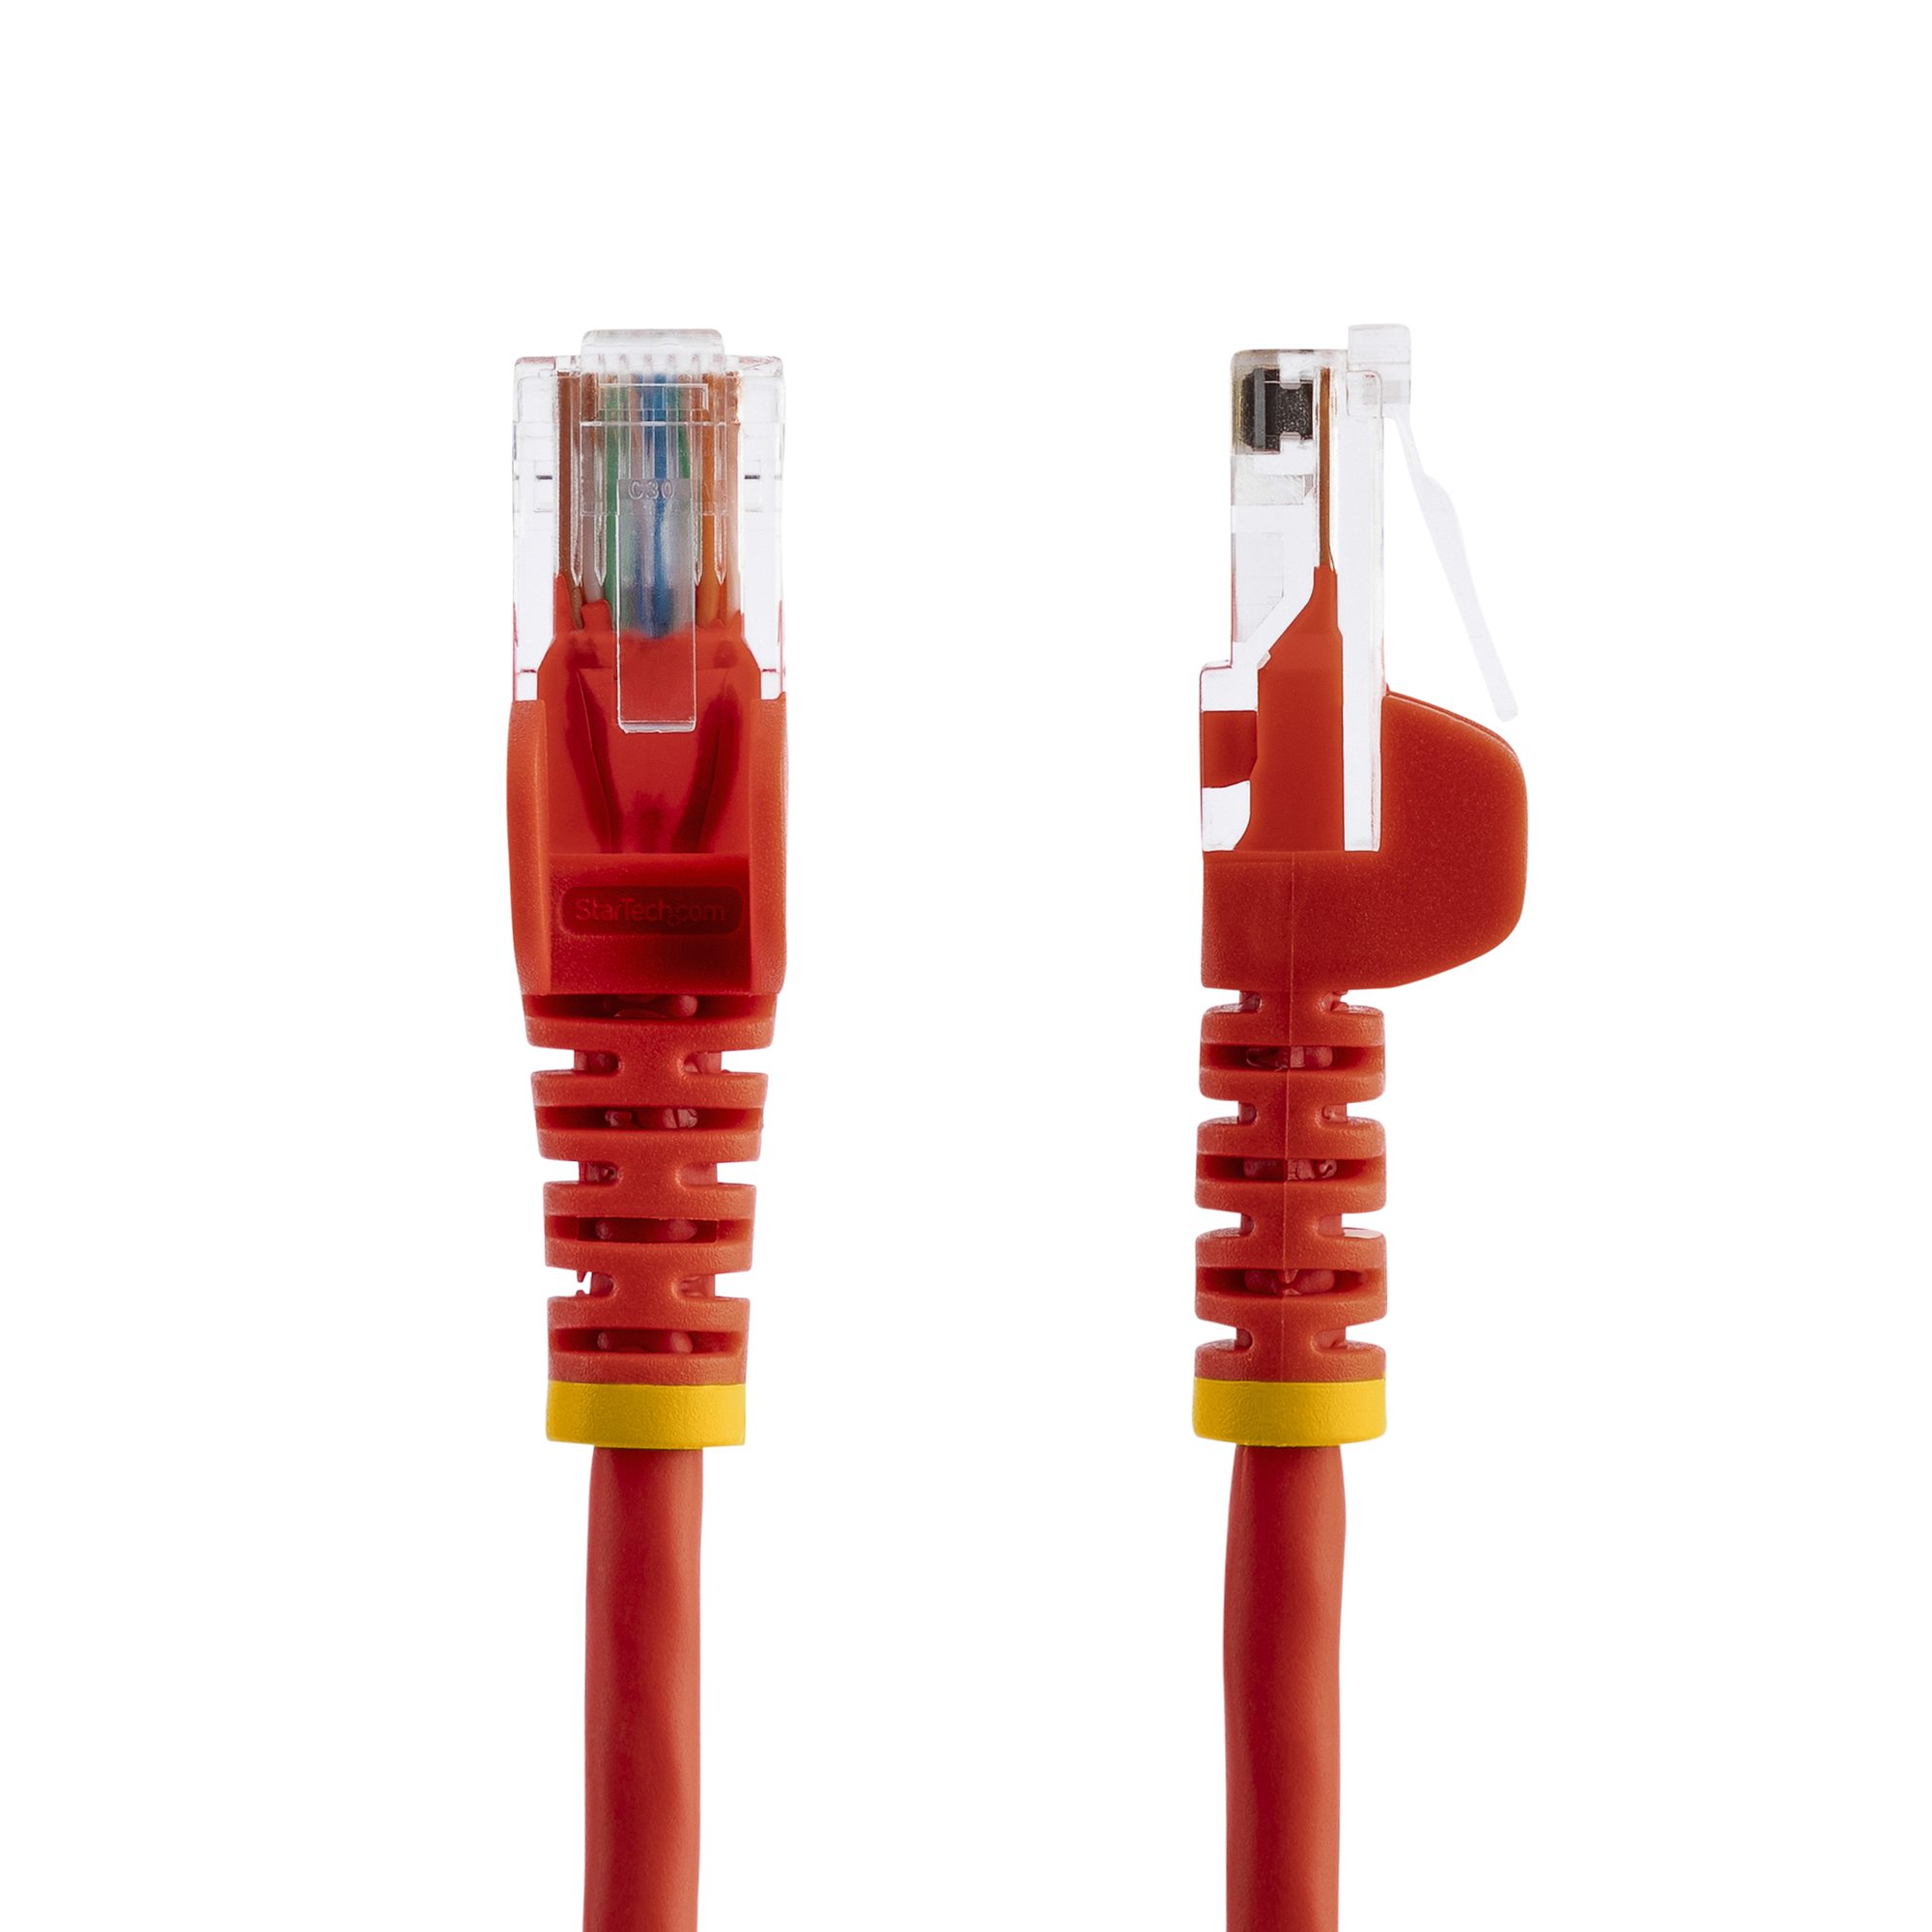 30 ft Red Cat5e Snagless Patch Cable (45PATCH30RD) - Cat 5e Cables, Cables